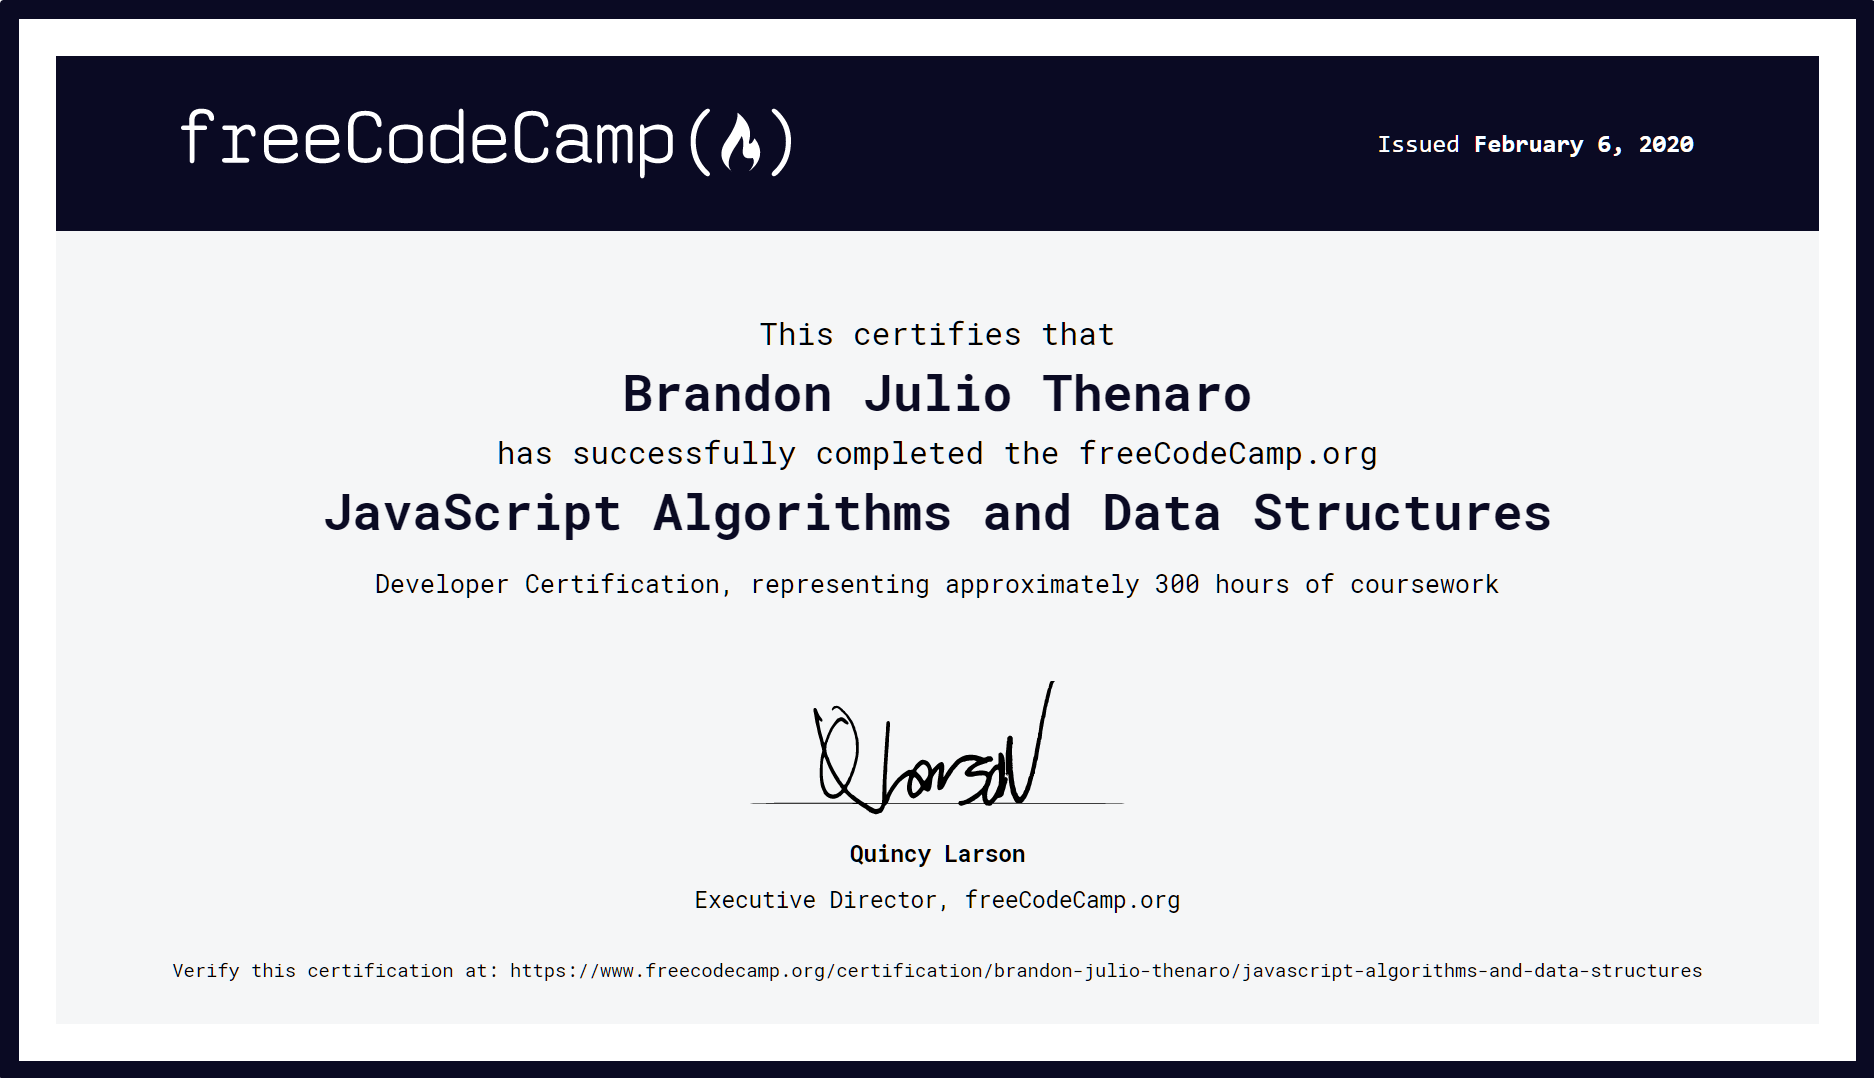 Certificate JavaScript Algorithms and Data Structures